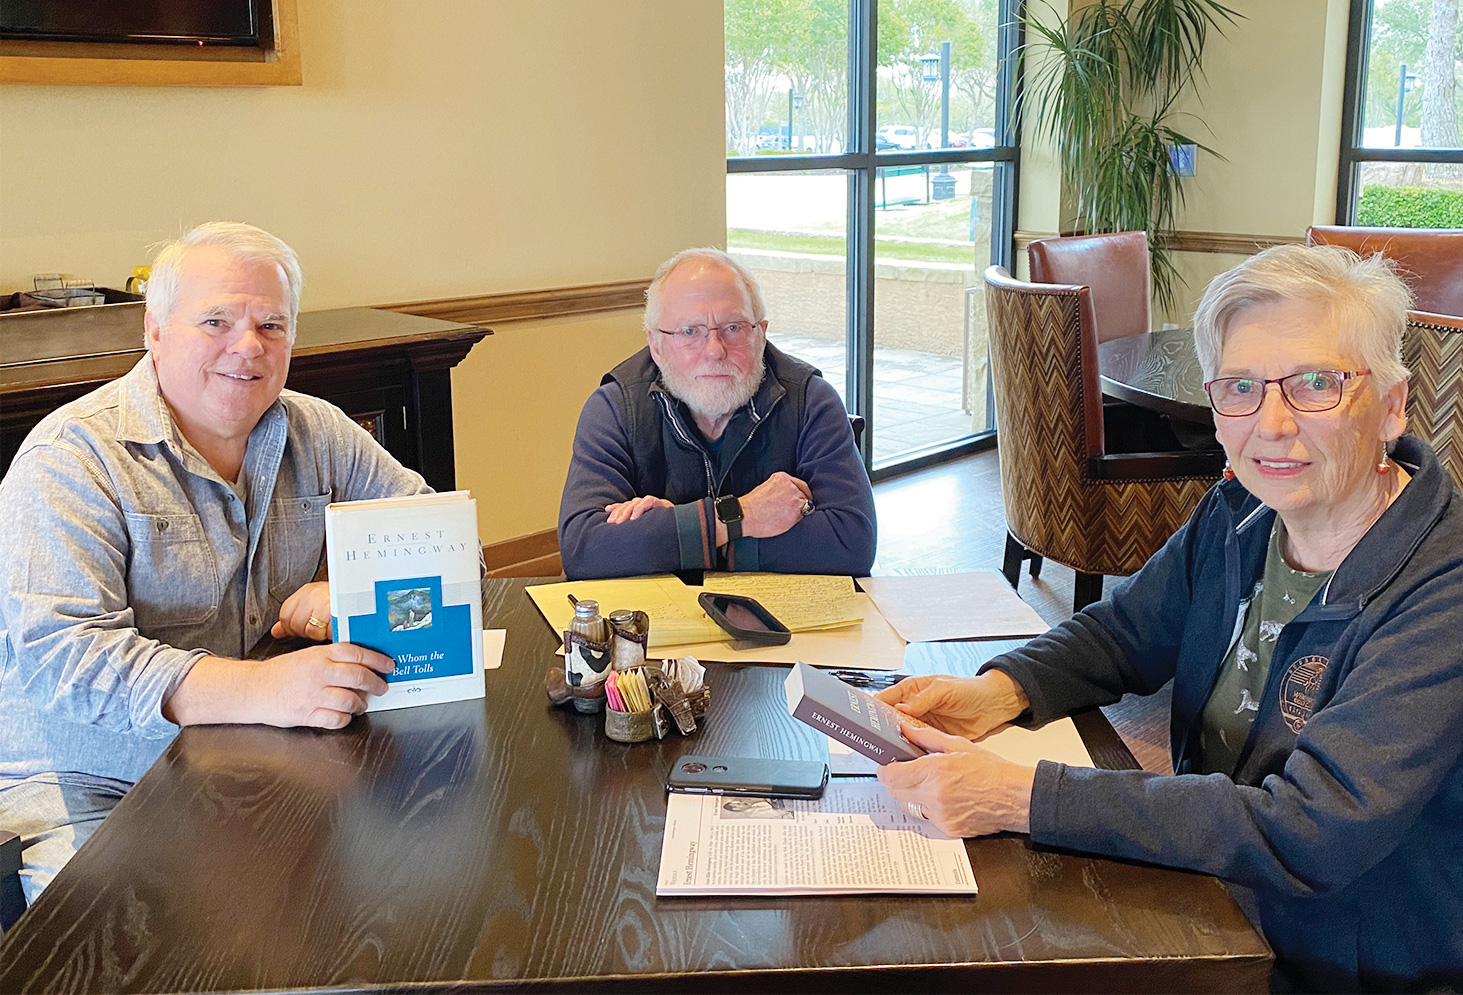 Planning session on For Whom the Bell Tolls (left to right): Alan Albarran, Mike Hall, and LaDonna Womochel